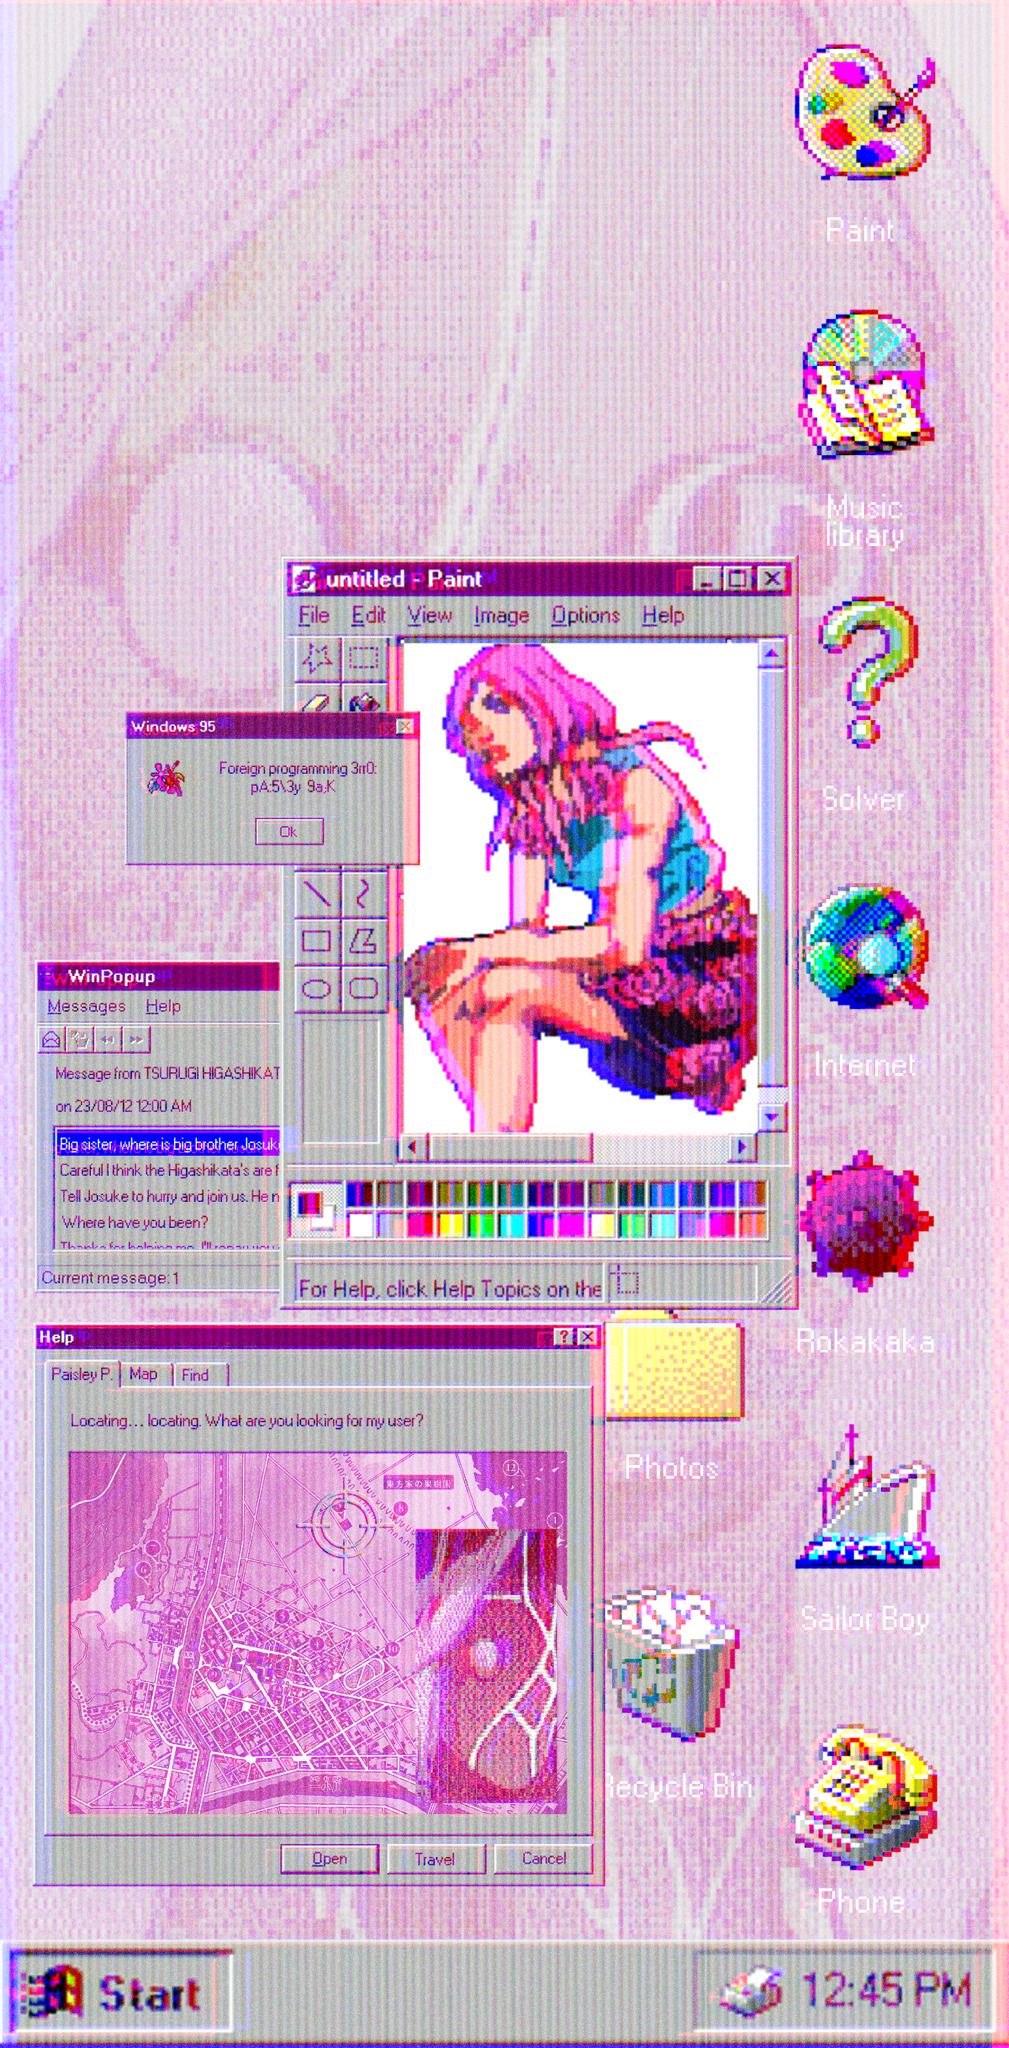 Aesthetic pastel anime girl desktop background with paint, internet, and other windows. - Webcore